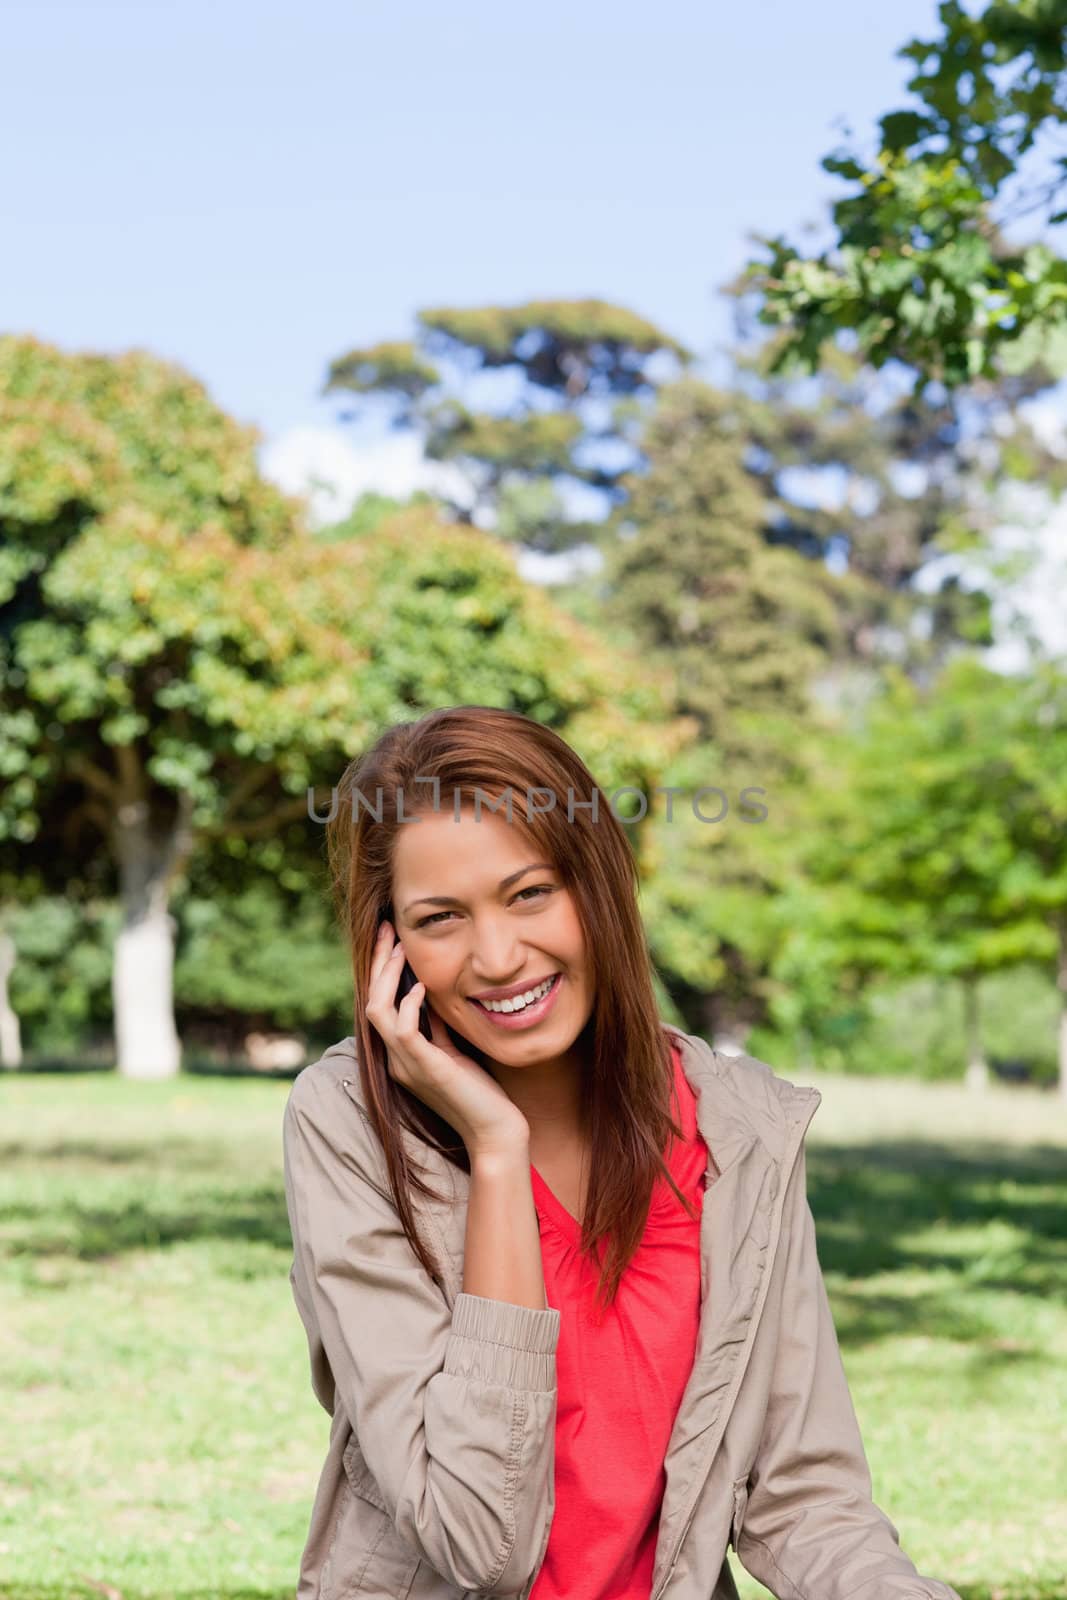 Young woman happy smiling while looking into the camera in an open grassland area